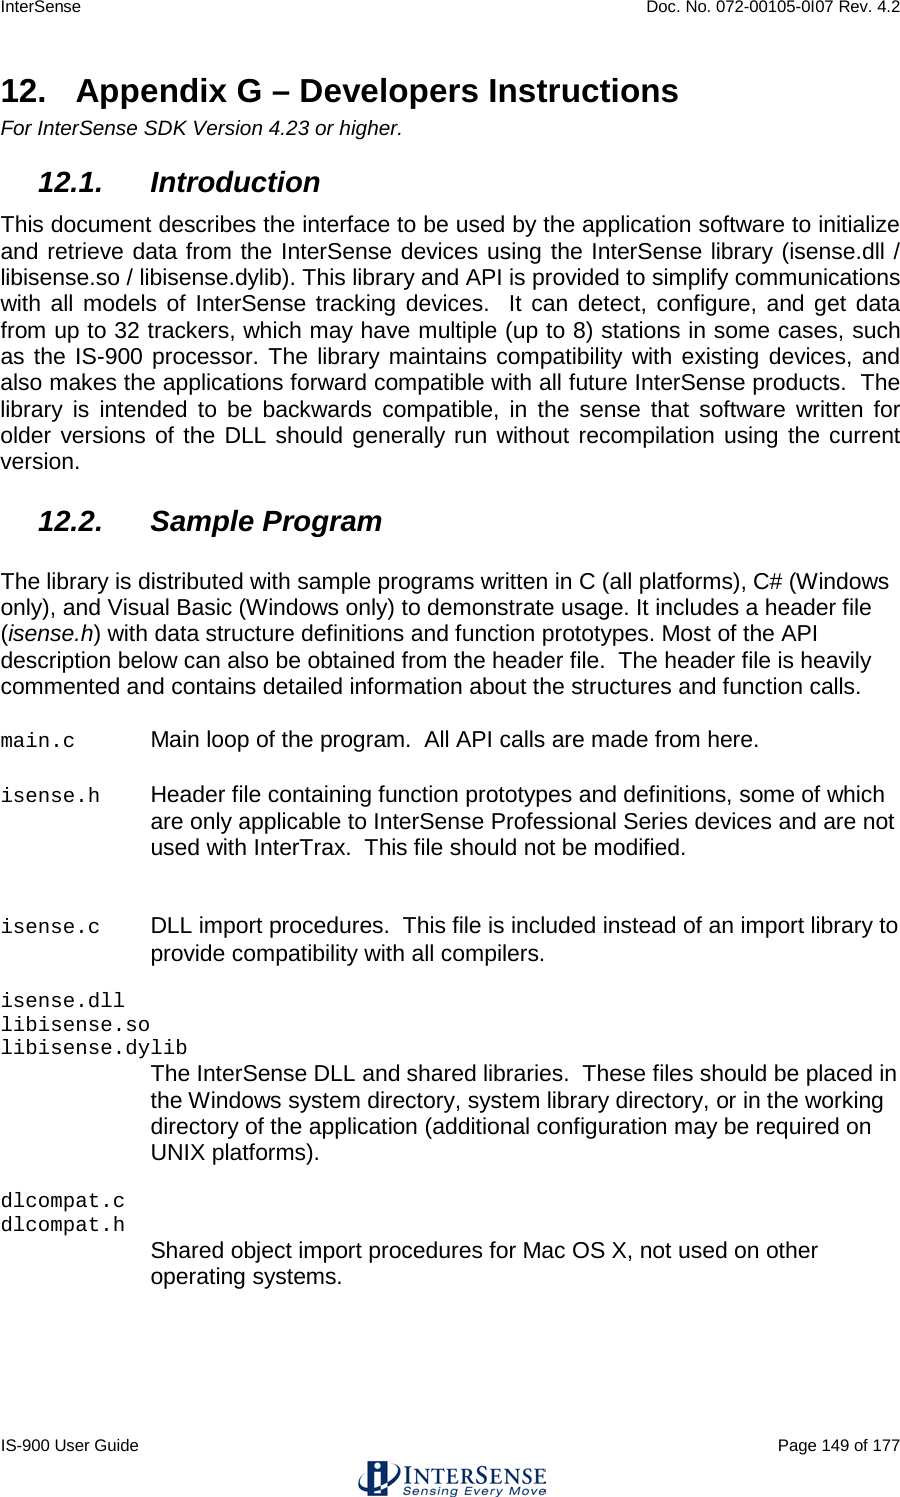 InterSense    Doc. No. 072-00105-0I07 Rev. 4.2 IS-900 User Guide                                                                                                                                          Page 149 of 177  12.  Appendix G – Developers Instructions For InterSense SDK Version 4.23 or higher. 12.1. Introduction This document describes the interface to be used by the application software to initialize and retrieve data from the InterSense devices using the InterSense library (isense.dll / libisense.so / libisense.dylib). This library and API is provided to simplify communications with all models of InterSense tracking devices.  It can detect, configure, and get data from up to 32 trackers, which may have multiple (up to 8) stations in some cases, such as the IS-900 processor. The library maintains compatibility with existing devices, and also makes the applications forward compatible with all future InterSense products.  The library is intended to be backwards compatible, in the sense that software written for older versions of the DLL should generally run without recompilation using the current version. 12.2. Sample Program  The library is distributed with sample programs written in C (all platforms), C# (Windows only), and Visual Basic (Windows only) to demonstrate usage. It includes a header file (isense.h) with data structure definitions and function prototypes. Most of the API description below can also be obtained from the header file.  The header file is heavily commented and contains detailed information about the structures and function calls.  main.c Main loop of the program.  All API calls are made from here.   isense.h Header file containing function prototypes and definitions, some of which are only applicable to InterSense Professional Series devices and are not used with InterTrax.  This file should not be modified.  isense.c DLL import procedures.  This file is included instead of an import library to provide compatibility with all compilers.  isense.dll libisense.so libisense.dylib  The InterSense DLL and shared libraries.  These files should be placed in the Windows system directory, system library directory, or in the working directory of the application (additional configuration may be required on UNIX platforms).  dlcompat.c dlcompat.h    Shared object import procedures for Mac OS X, not used on other operating systems.   